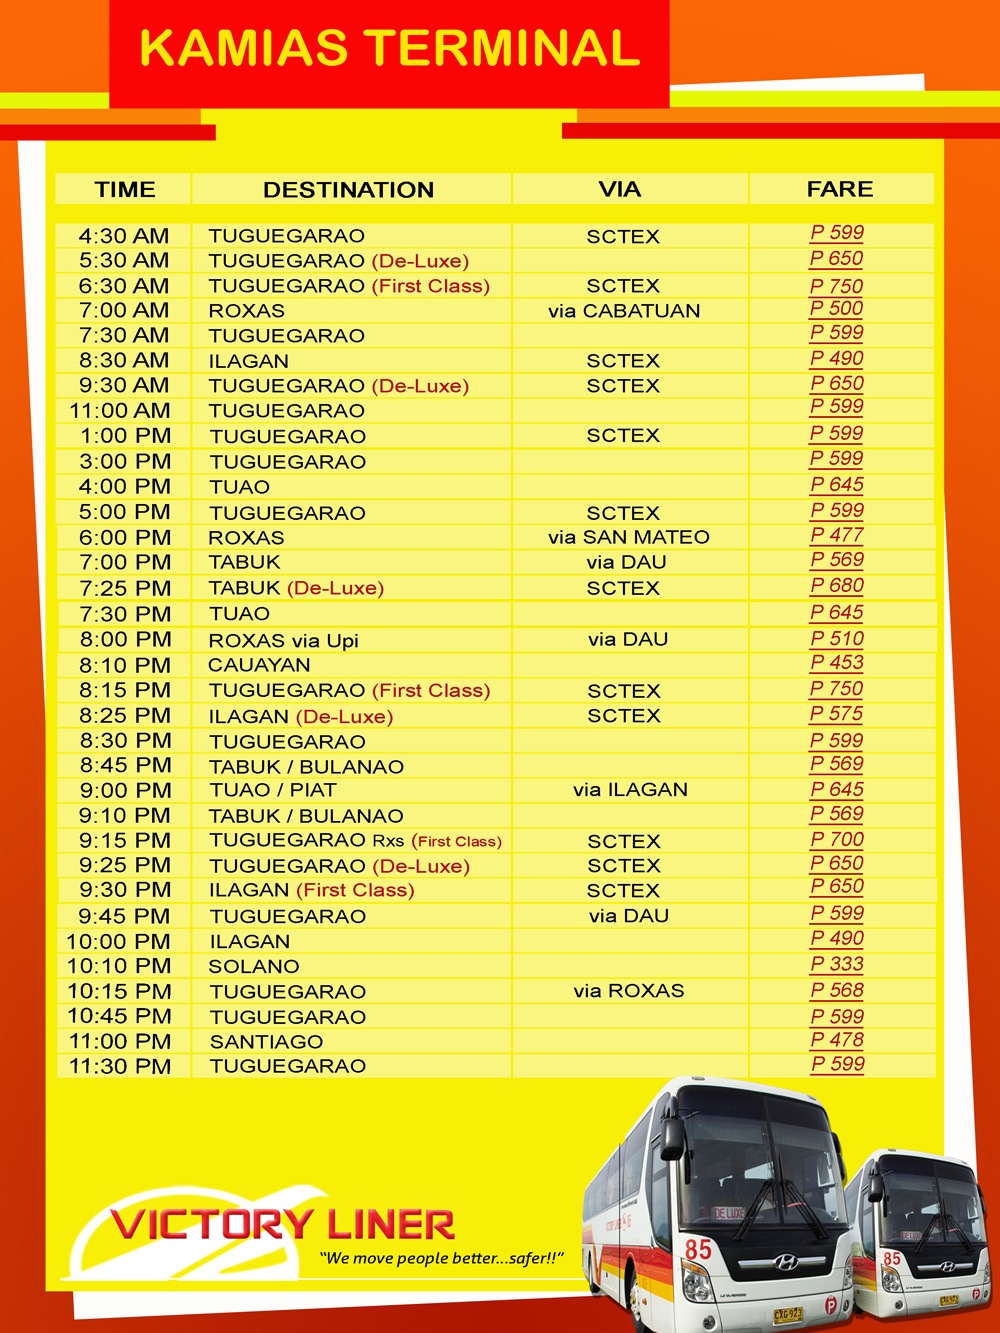 Baguio Trip via Victory Liner First Class (Deluxe) Bus With Schedules